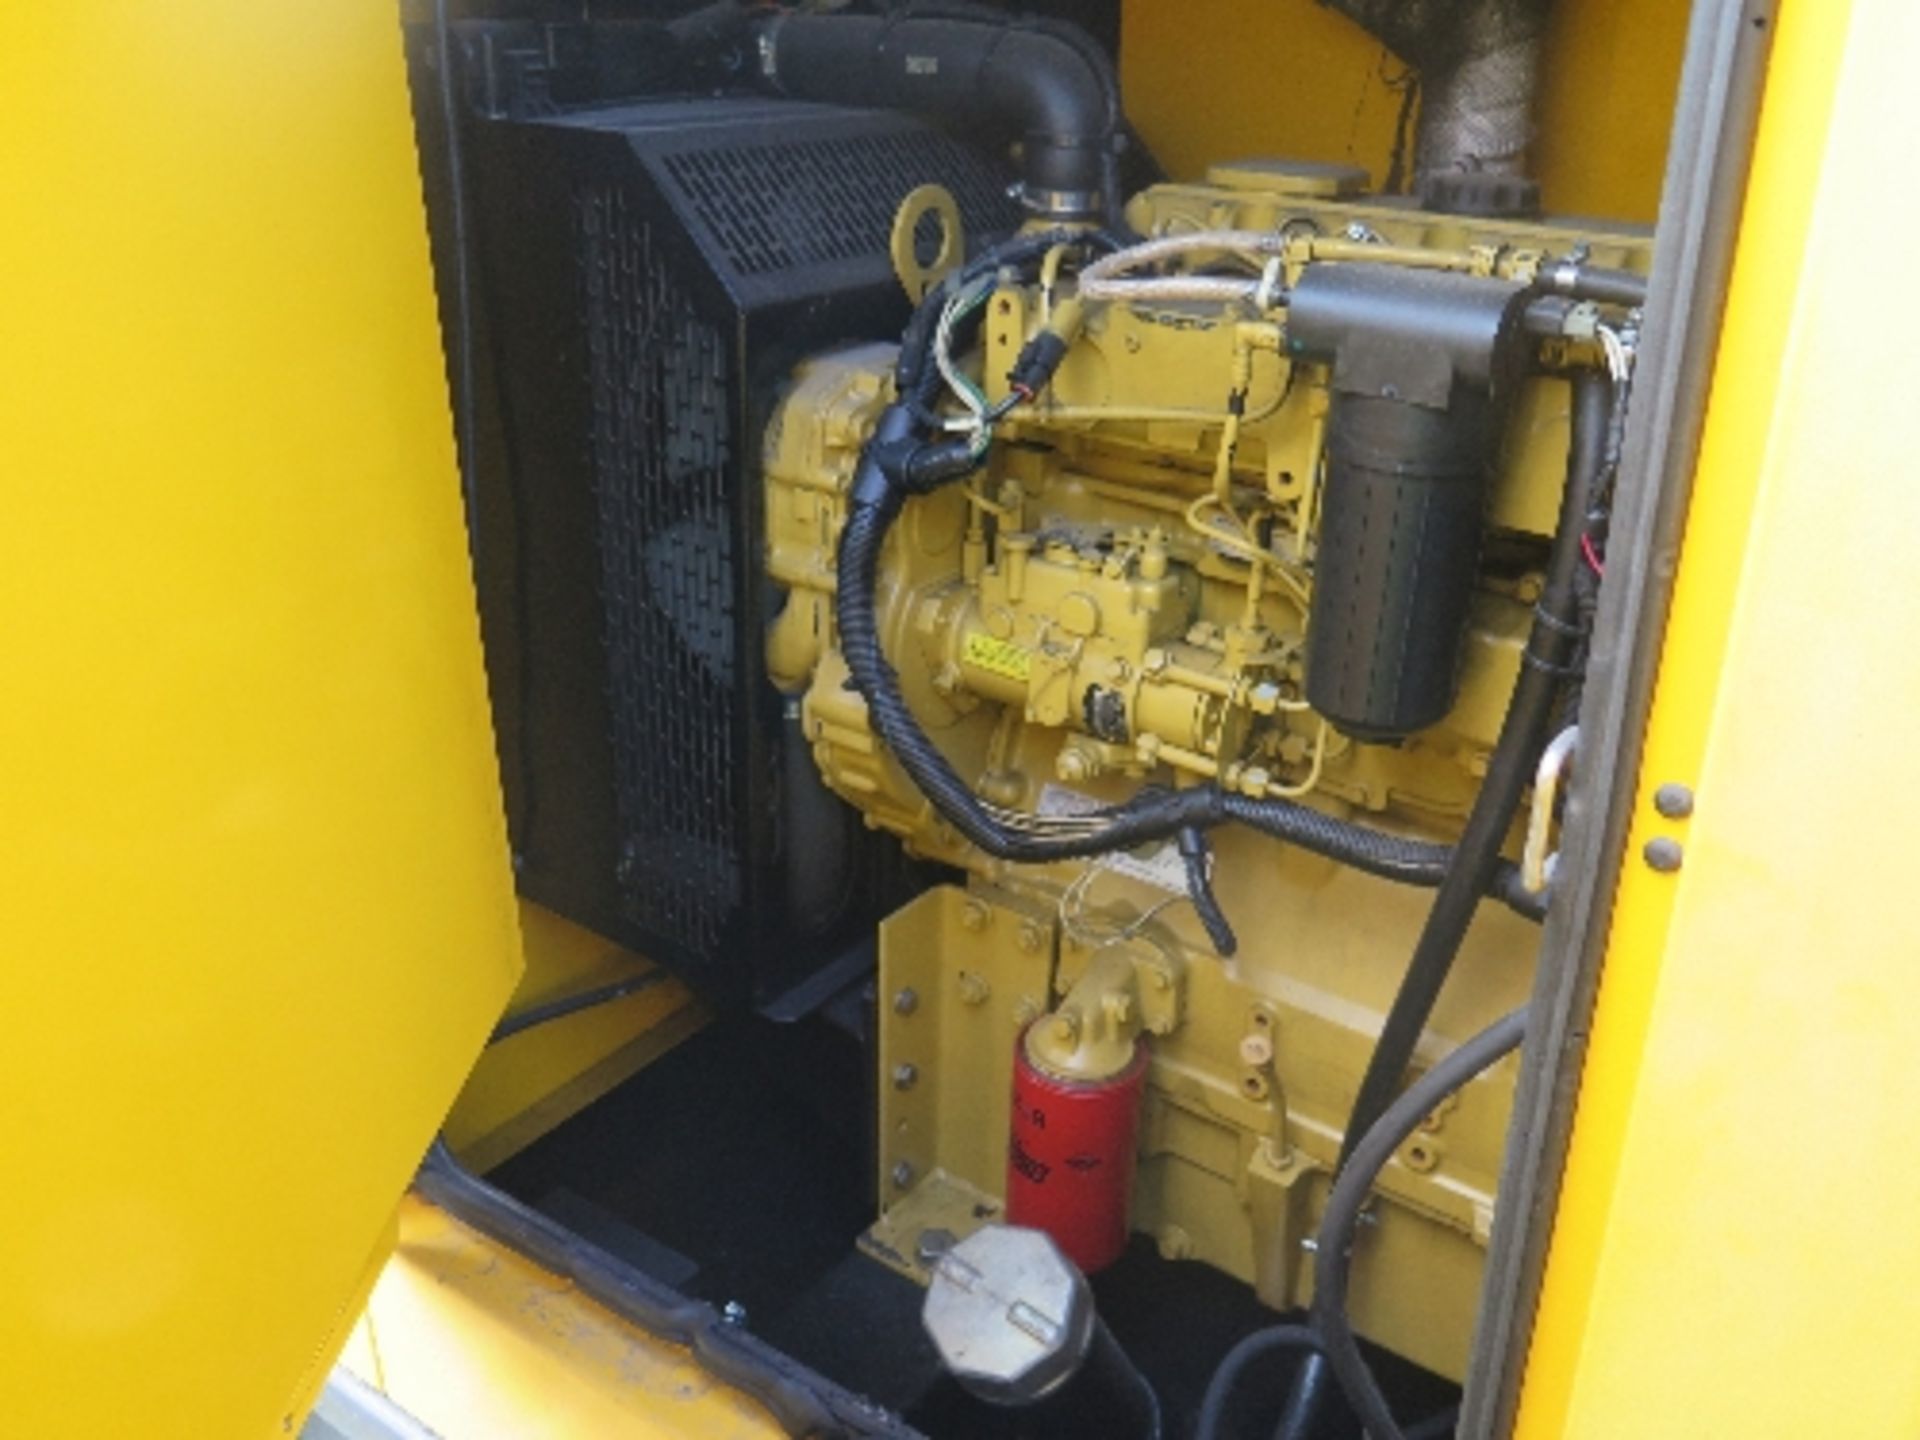 Caterpillar XQE80 generator 130887 hrs 157810
PERKINS - RUNS AND MAKES POWER
CYLINDER HEAD FUEL - Image 5 of 6